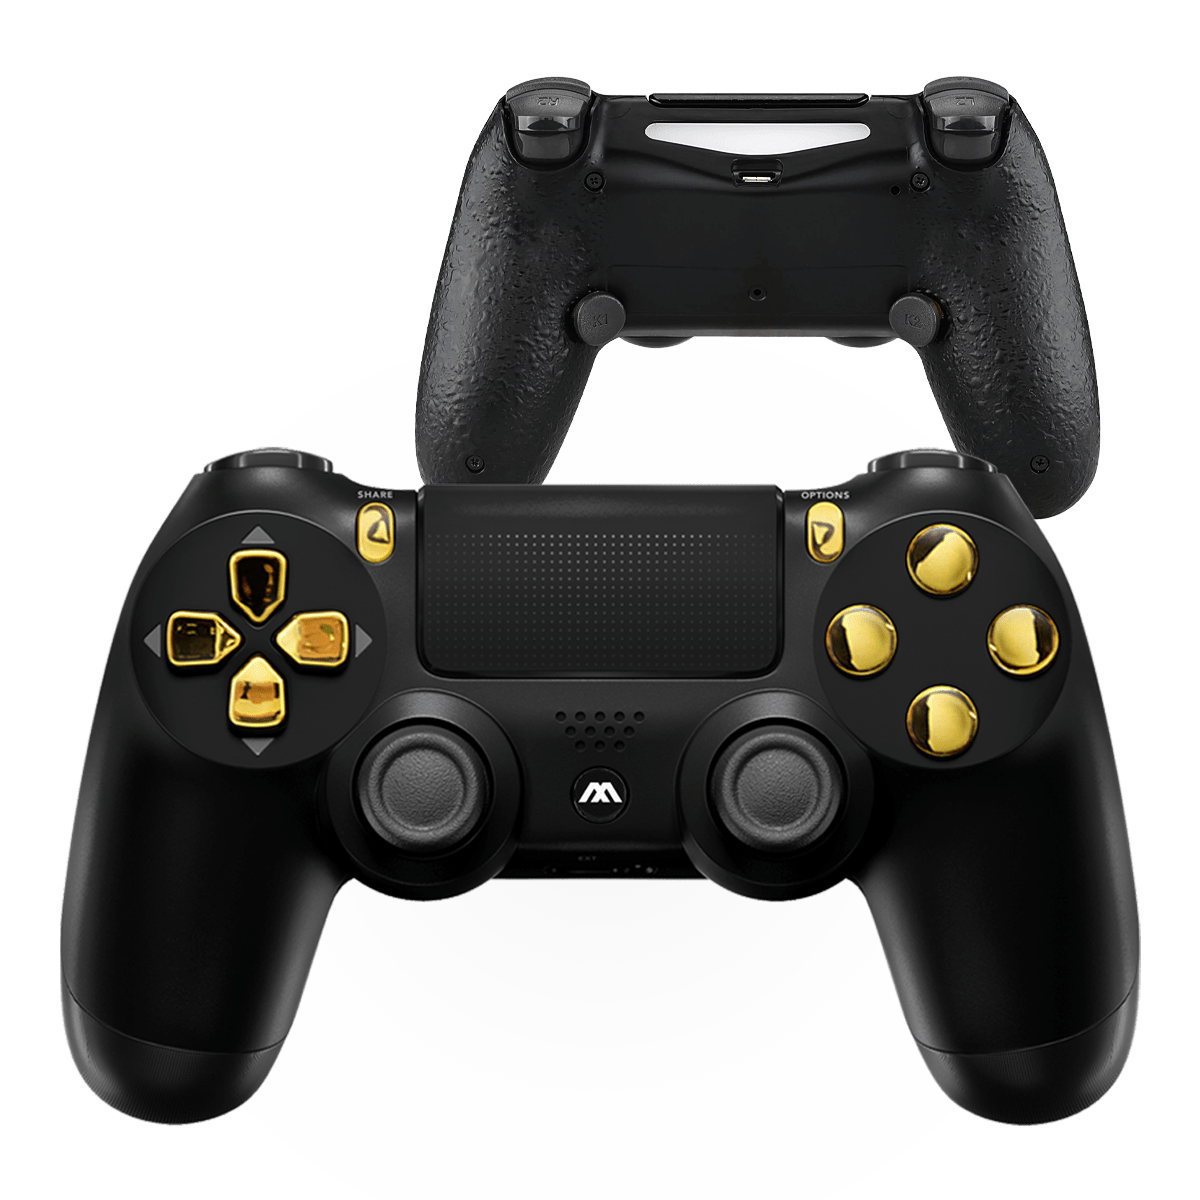 BLACK GOLD EXTREME PS4 SMART PRO MODDED CONTROLLER - ModdedZone